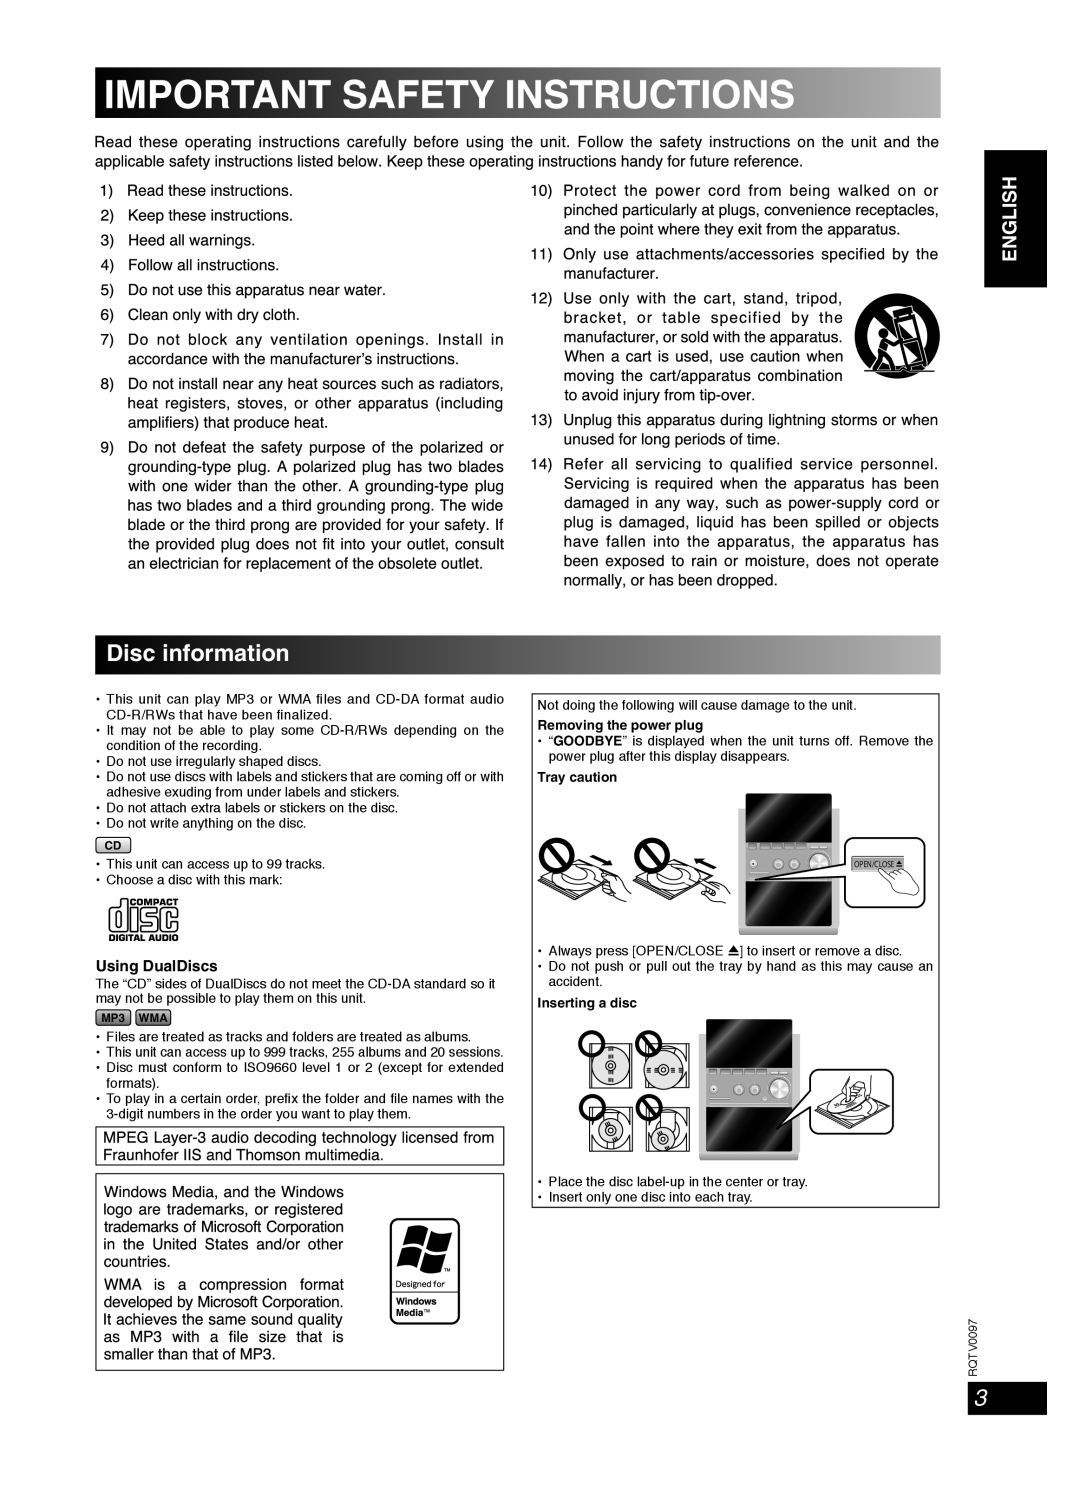 Panasonic RQTV0097-2P, SCPM533, SC-PM53 important safety instructions Disc information, English 